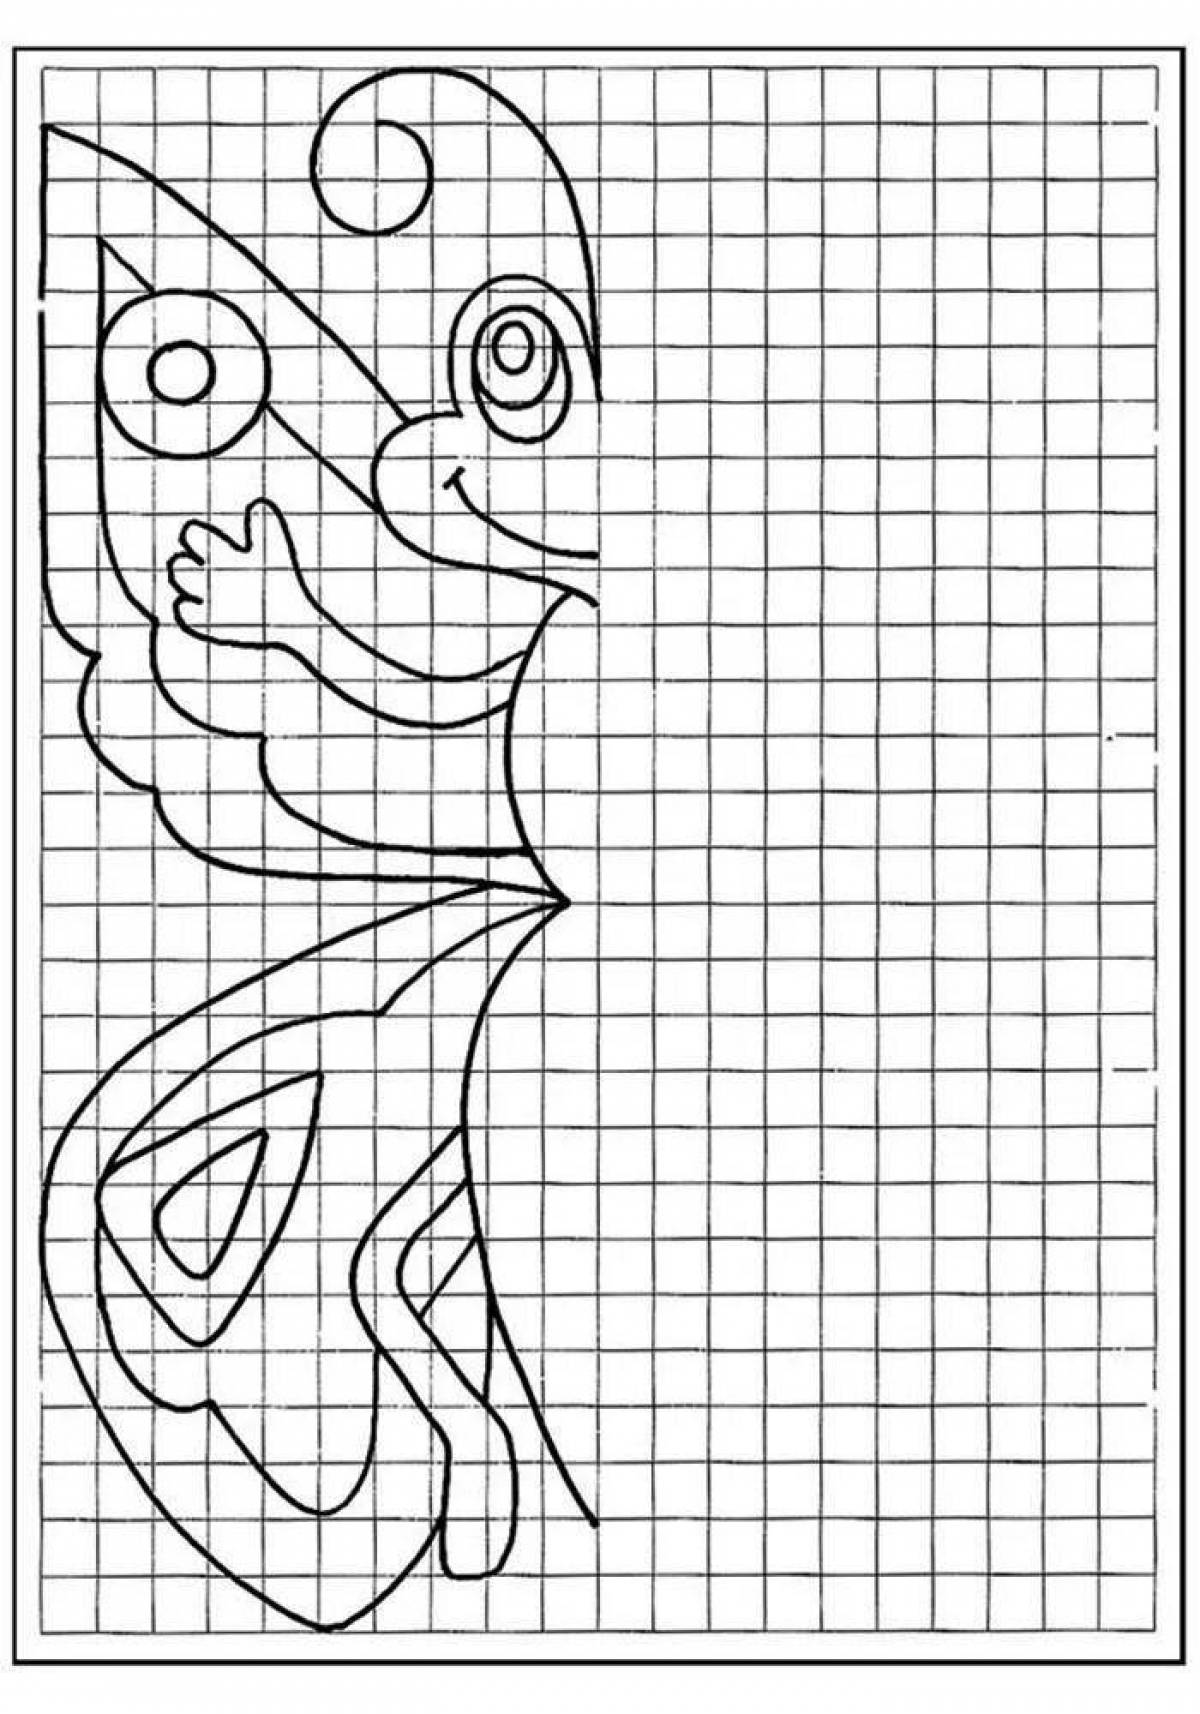 Fun cells coloring page